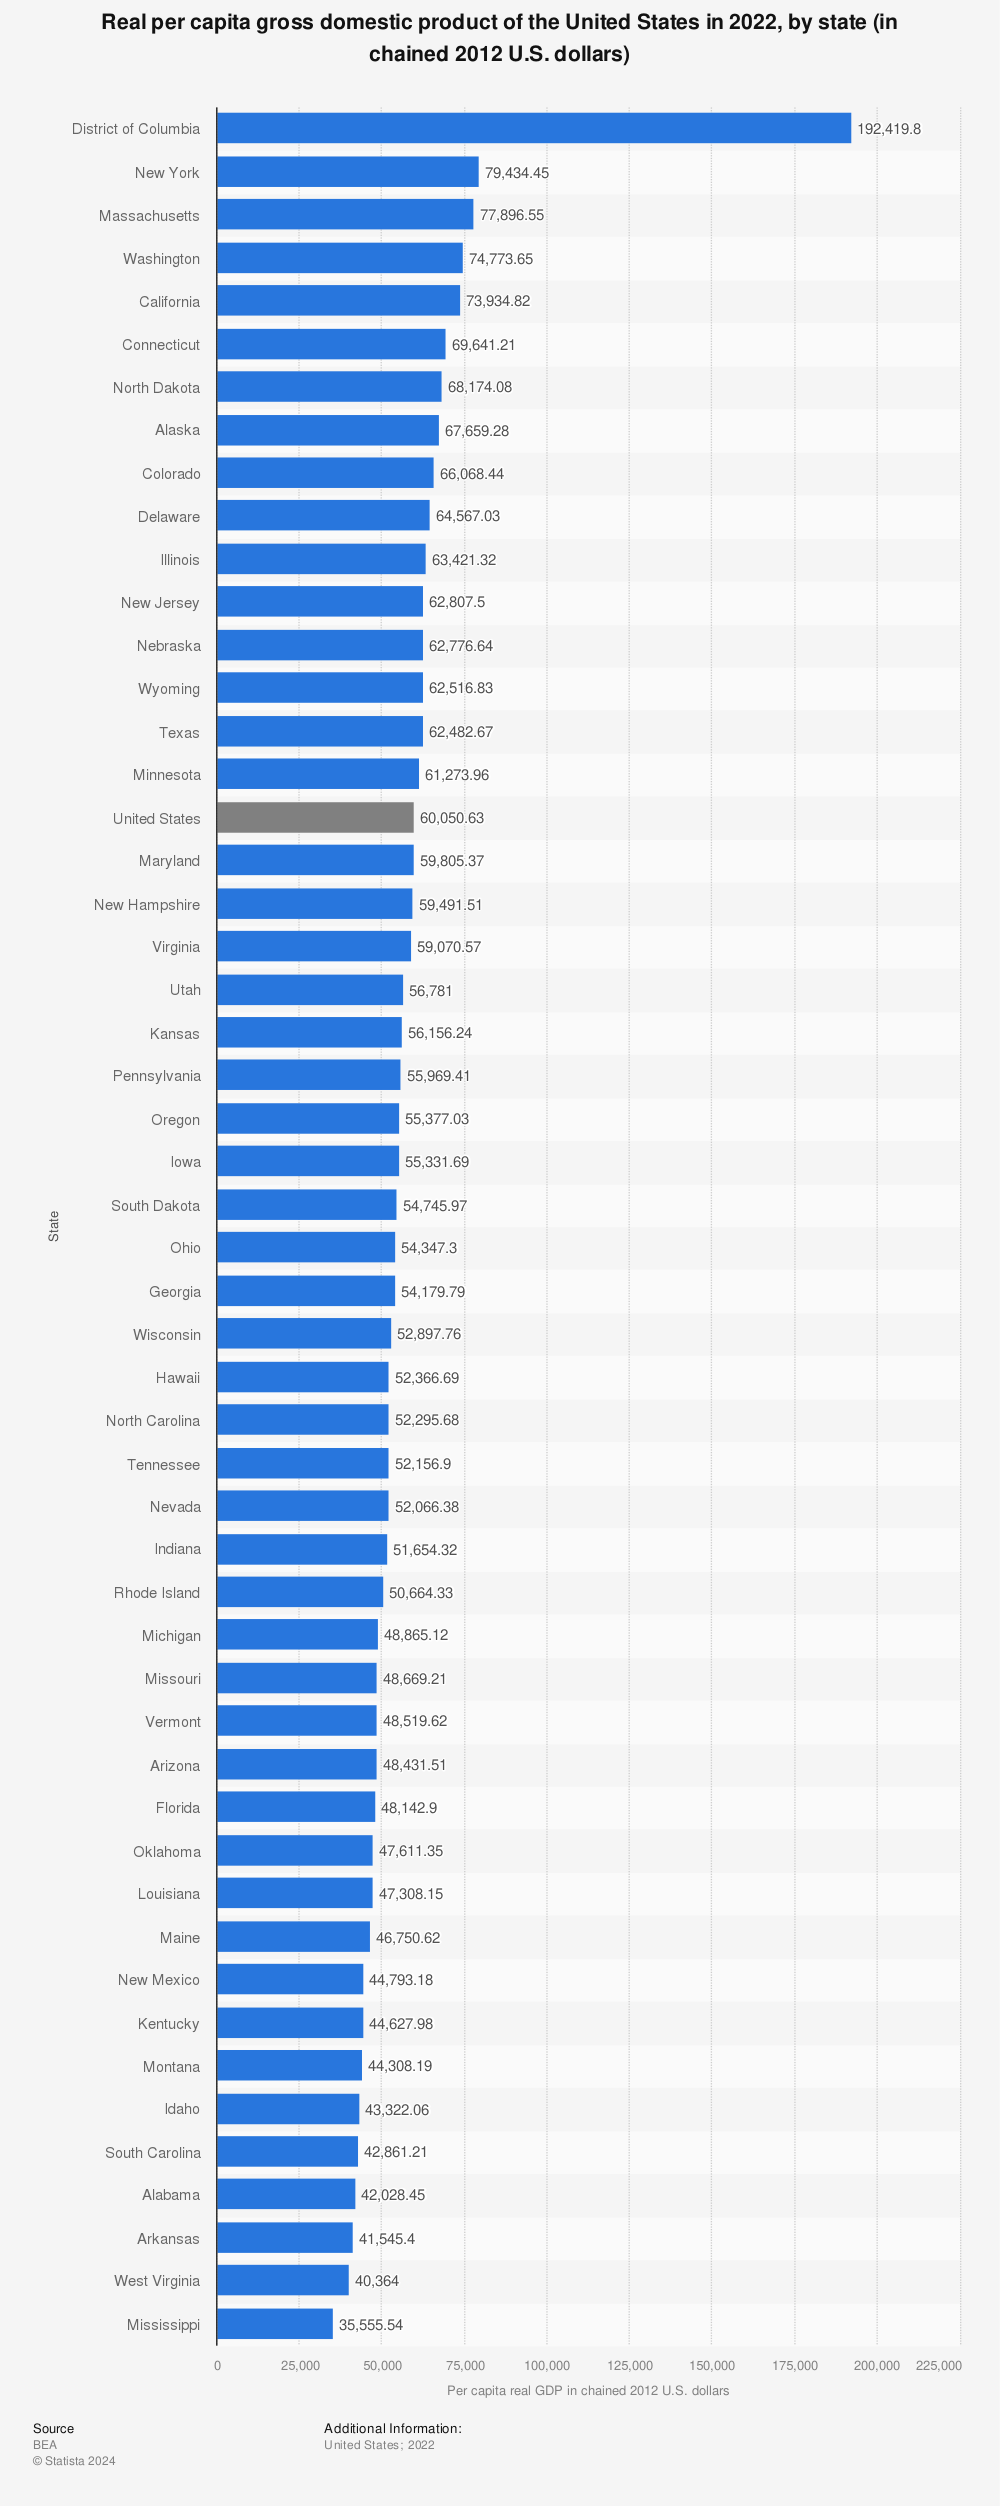 Statistic: Real per capita gross domestic product of the United States in 2022, by state (in chained 2012 U.S. dollars) | Statista